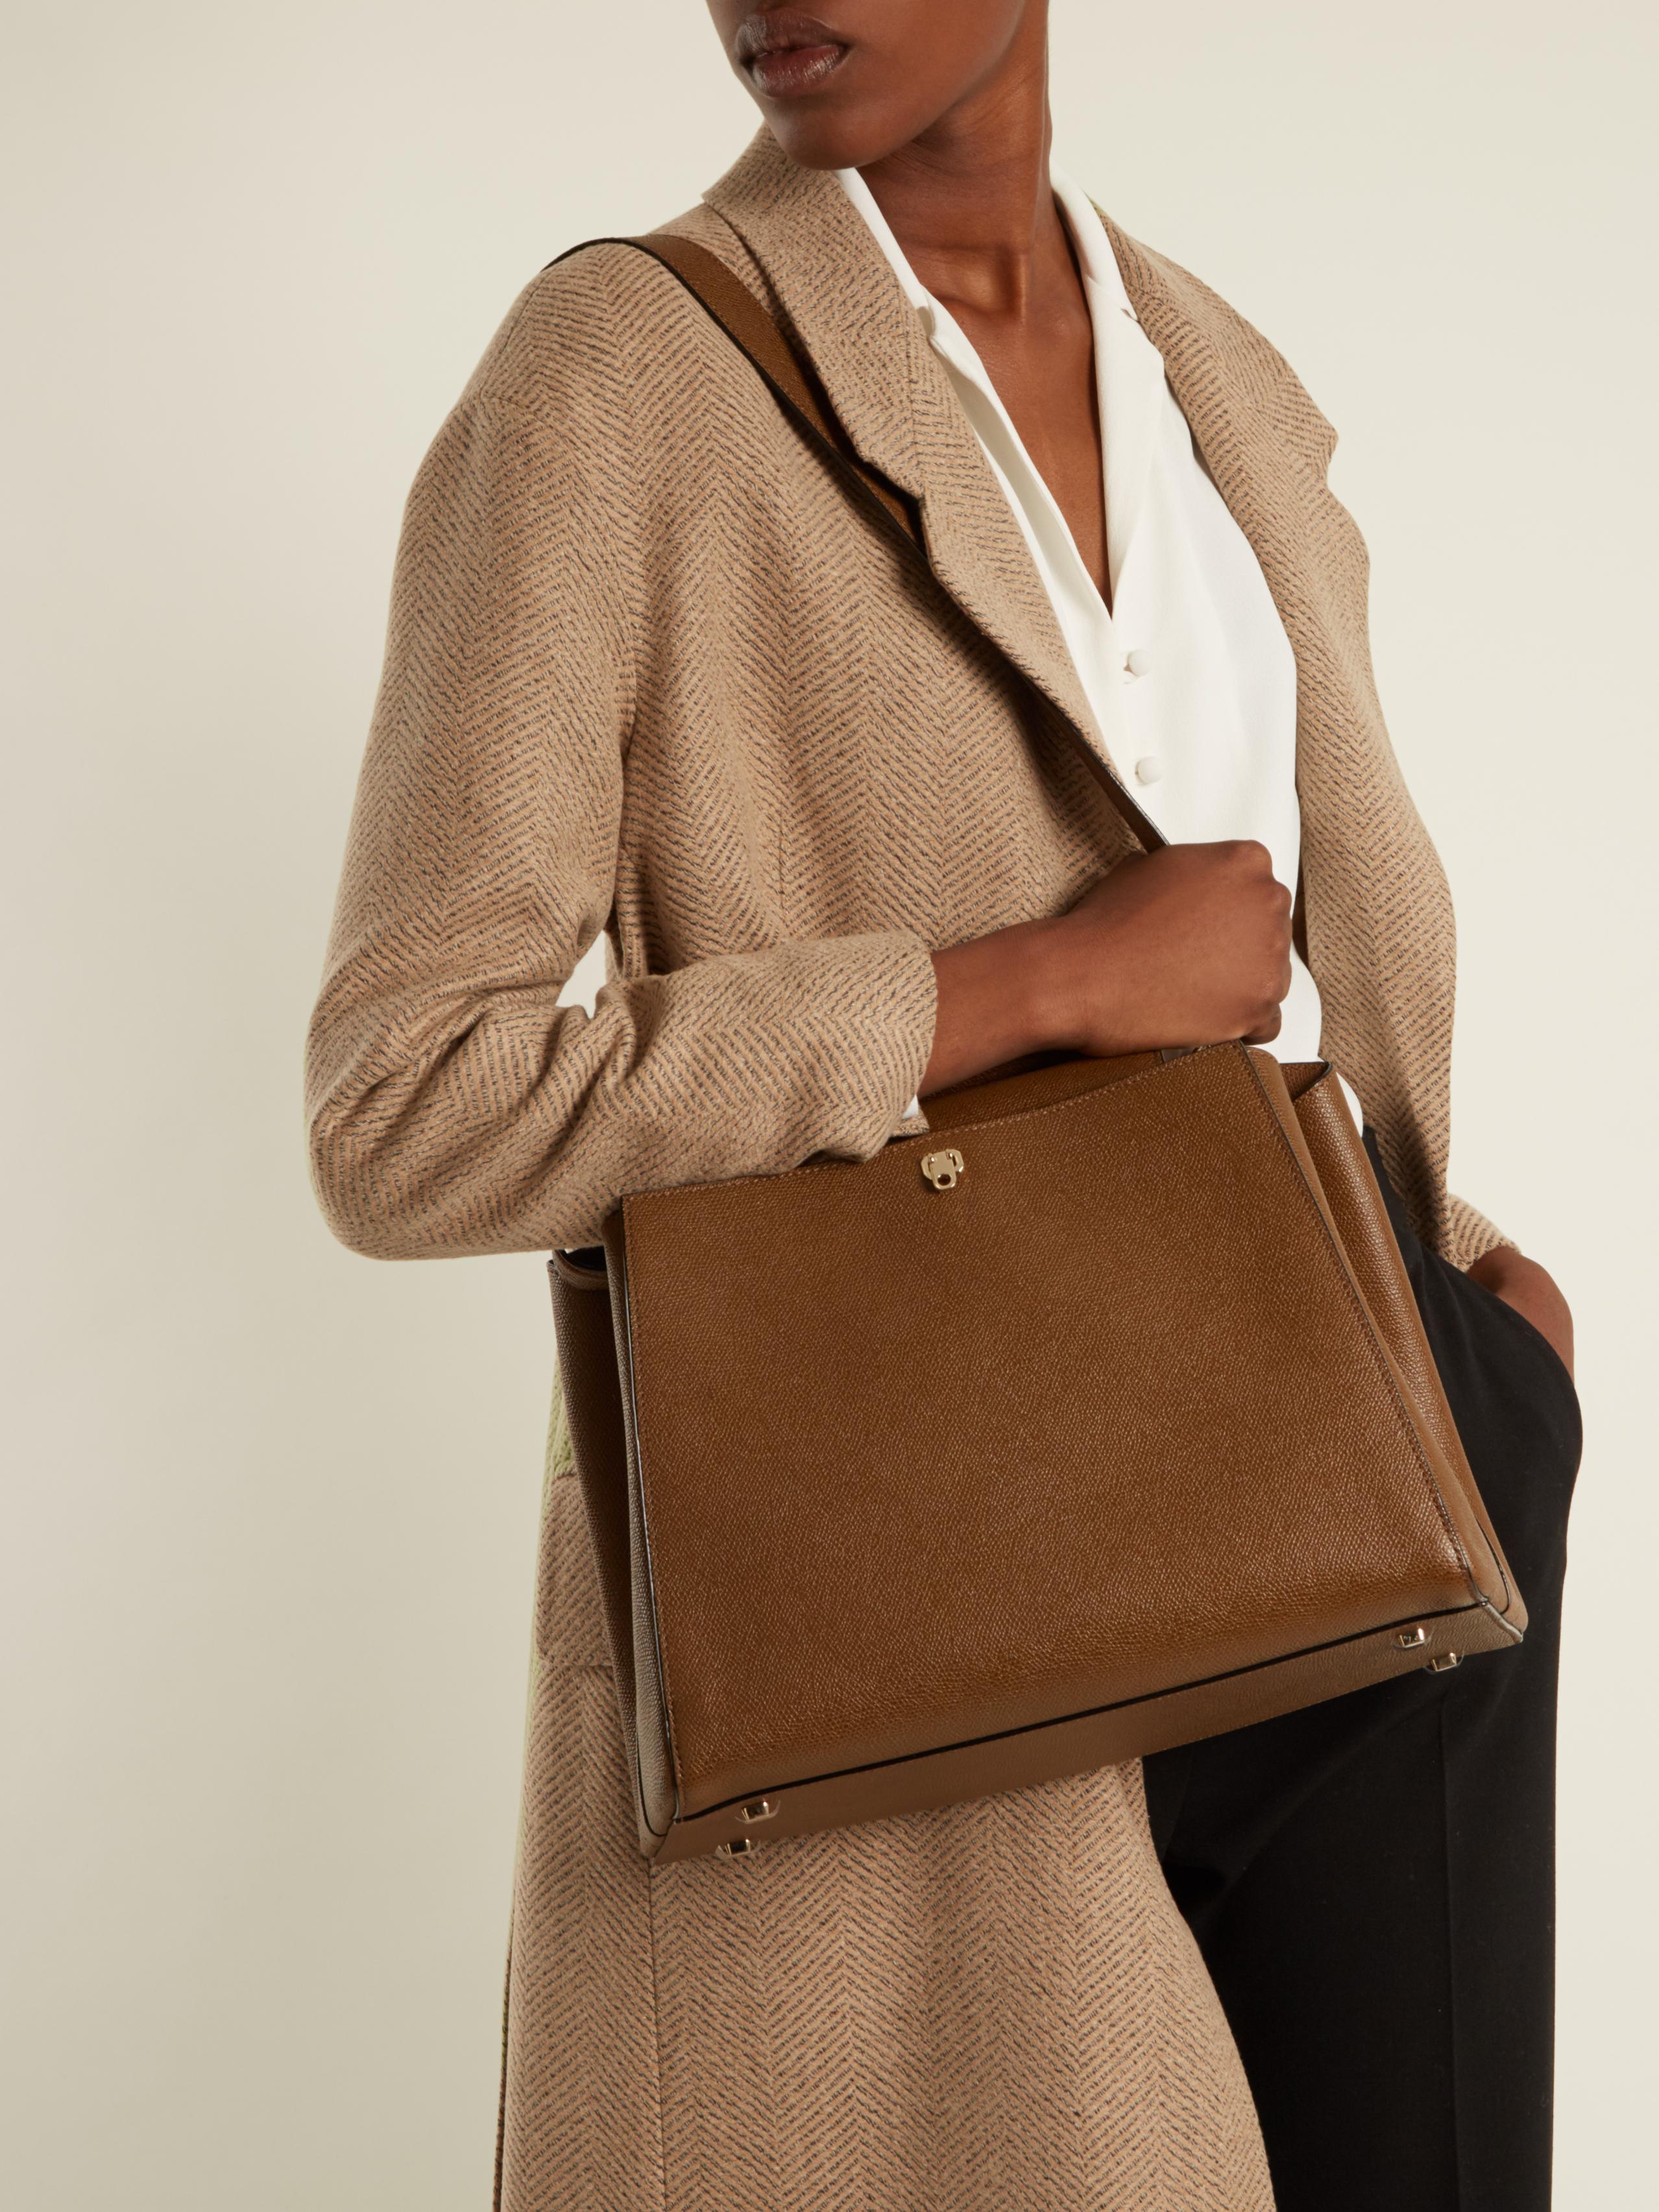 The New Classics 10 Bags Perfect for the Everyday  PurseBlog